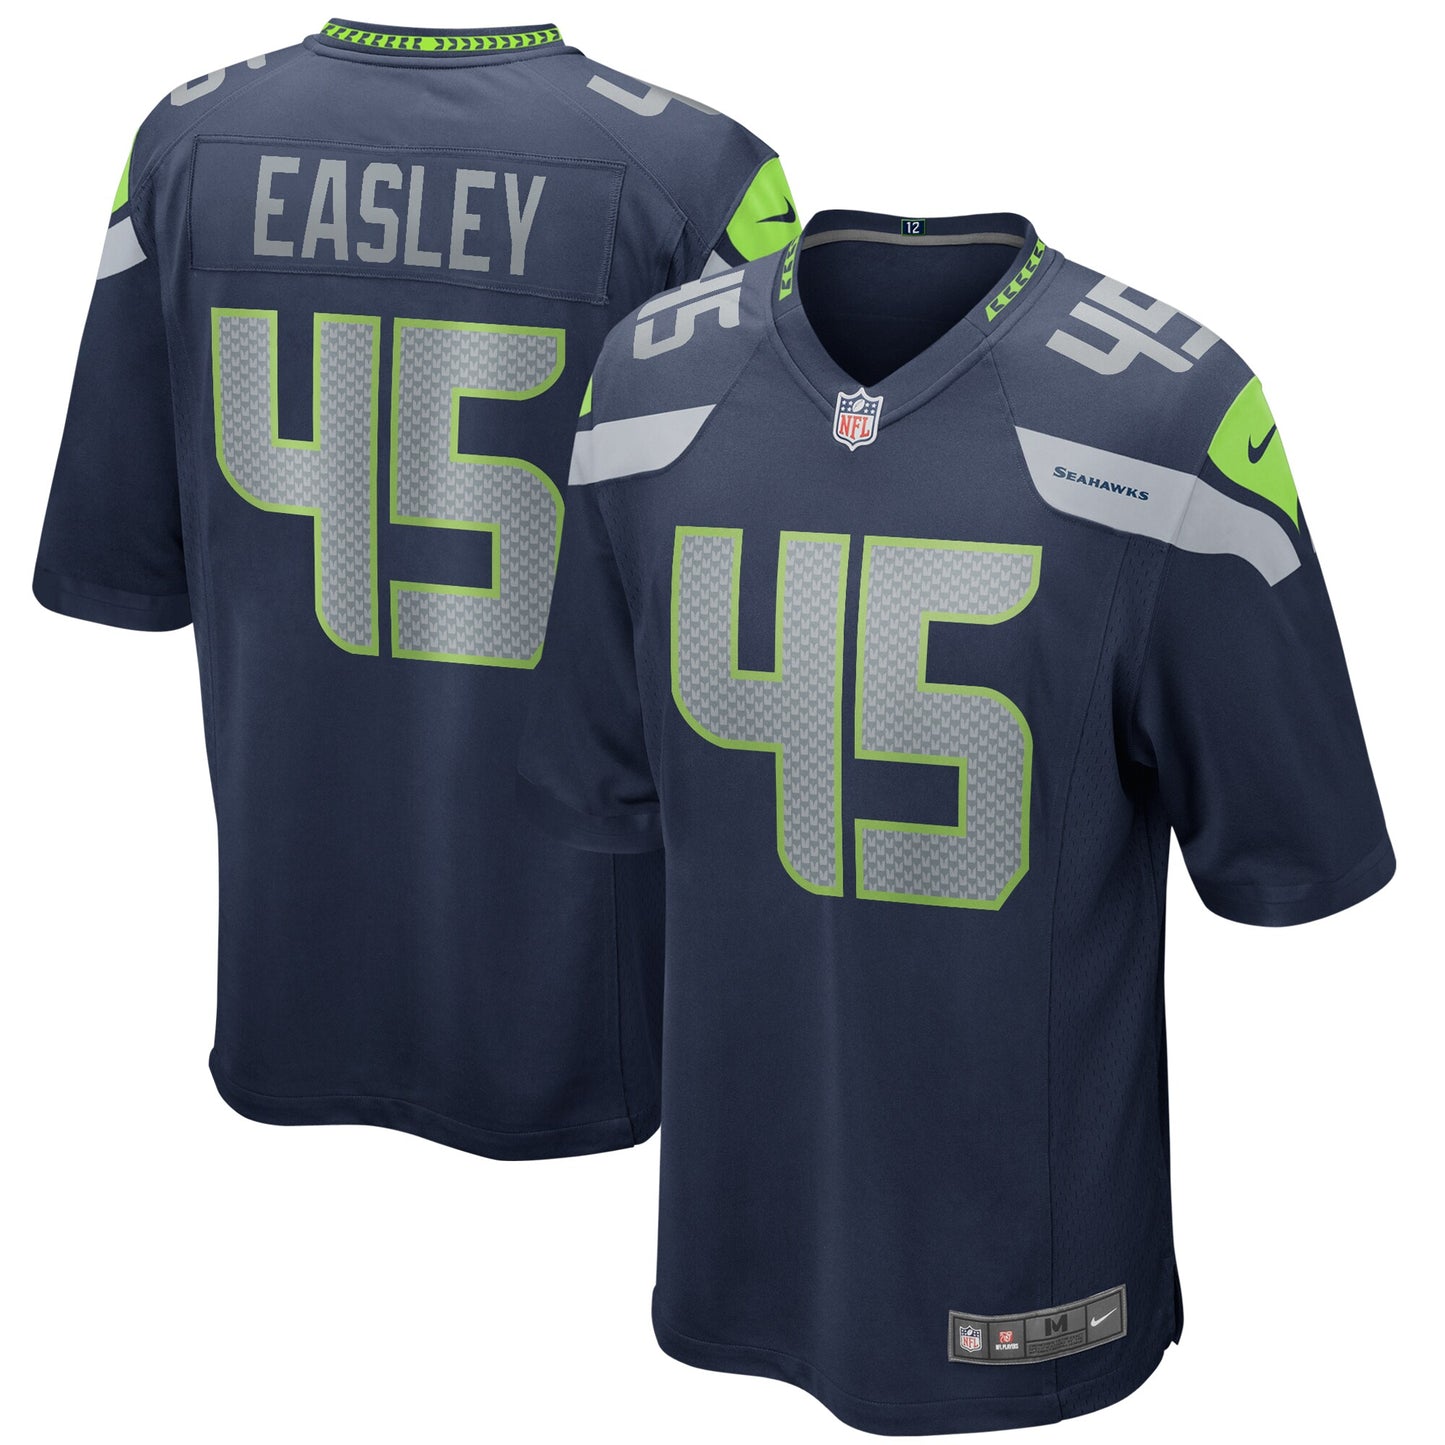 Kenny Easley Seattle Seahawks Nike Game Retired Player Jersey - College Navy